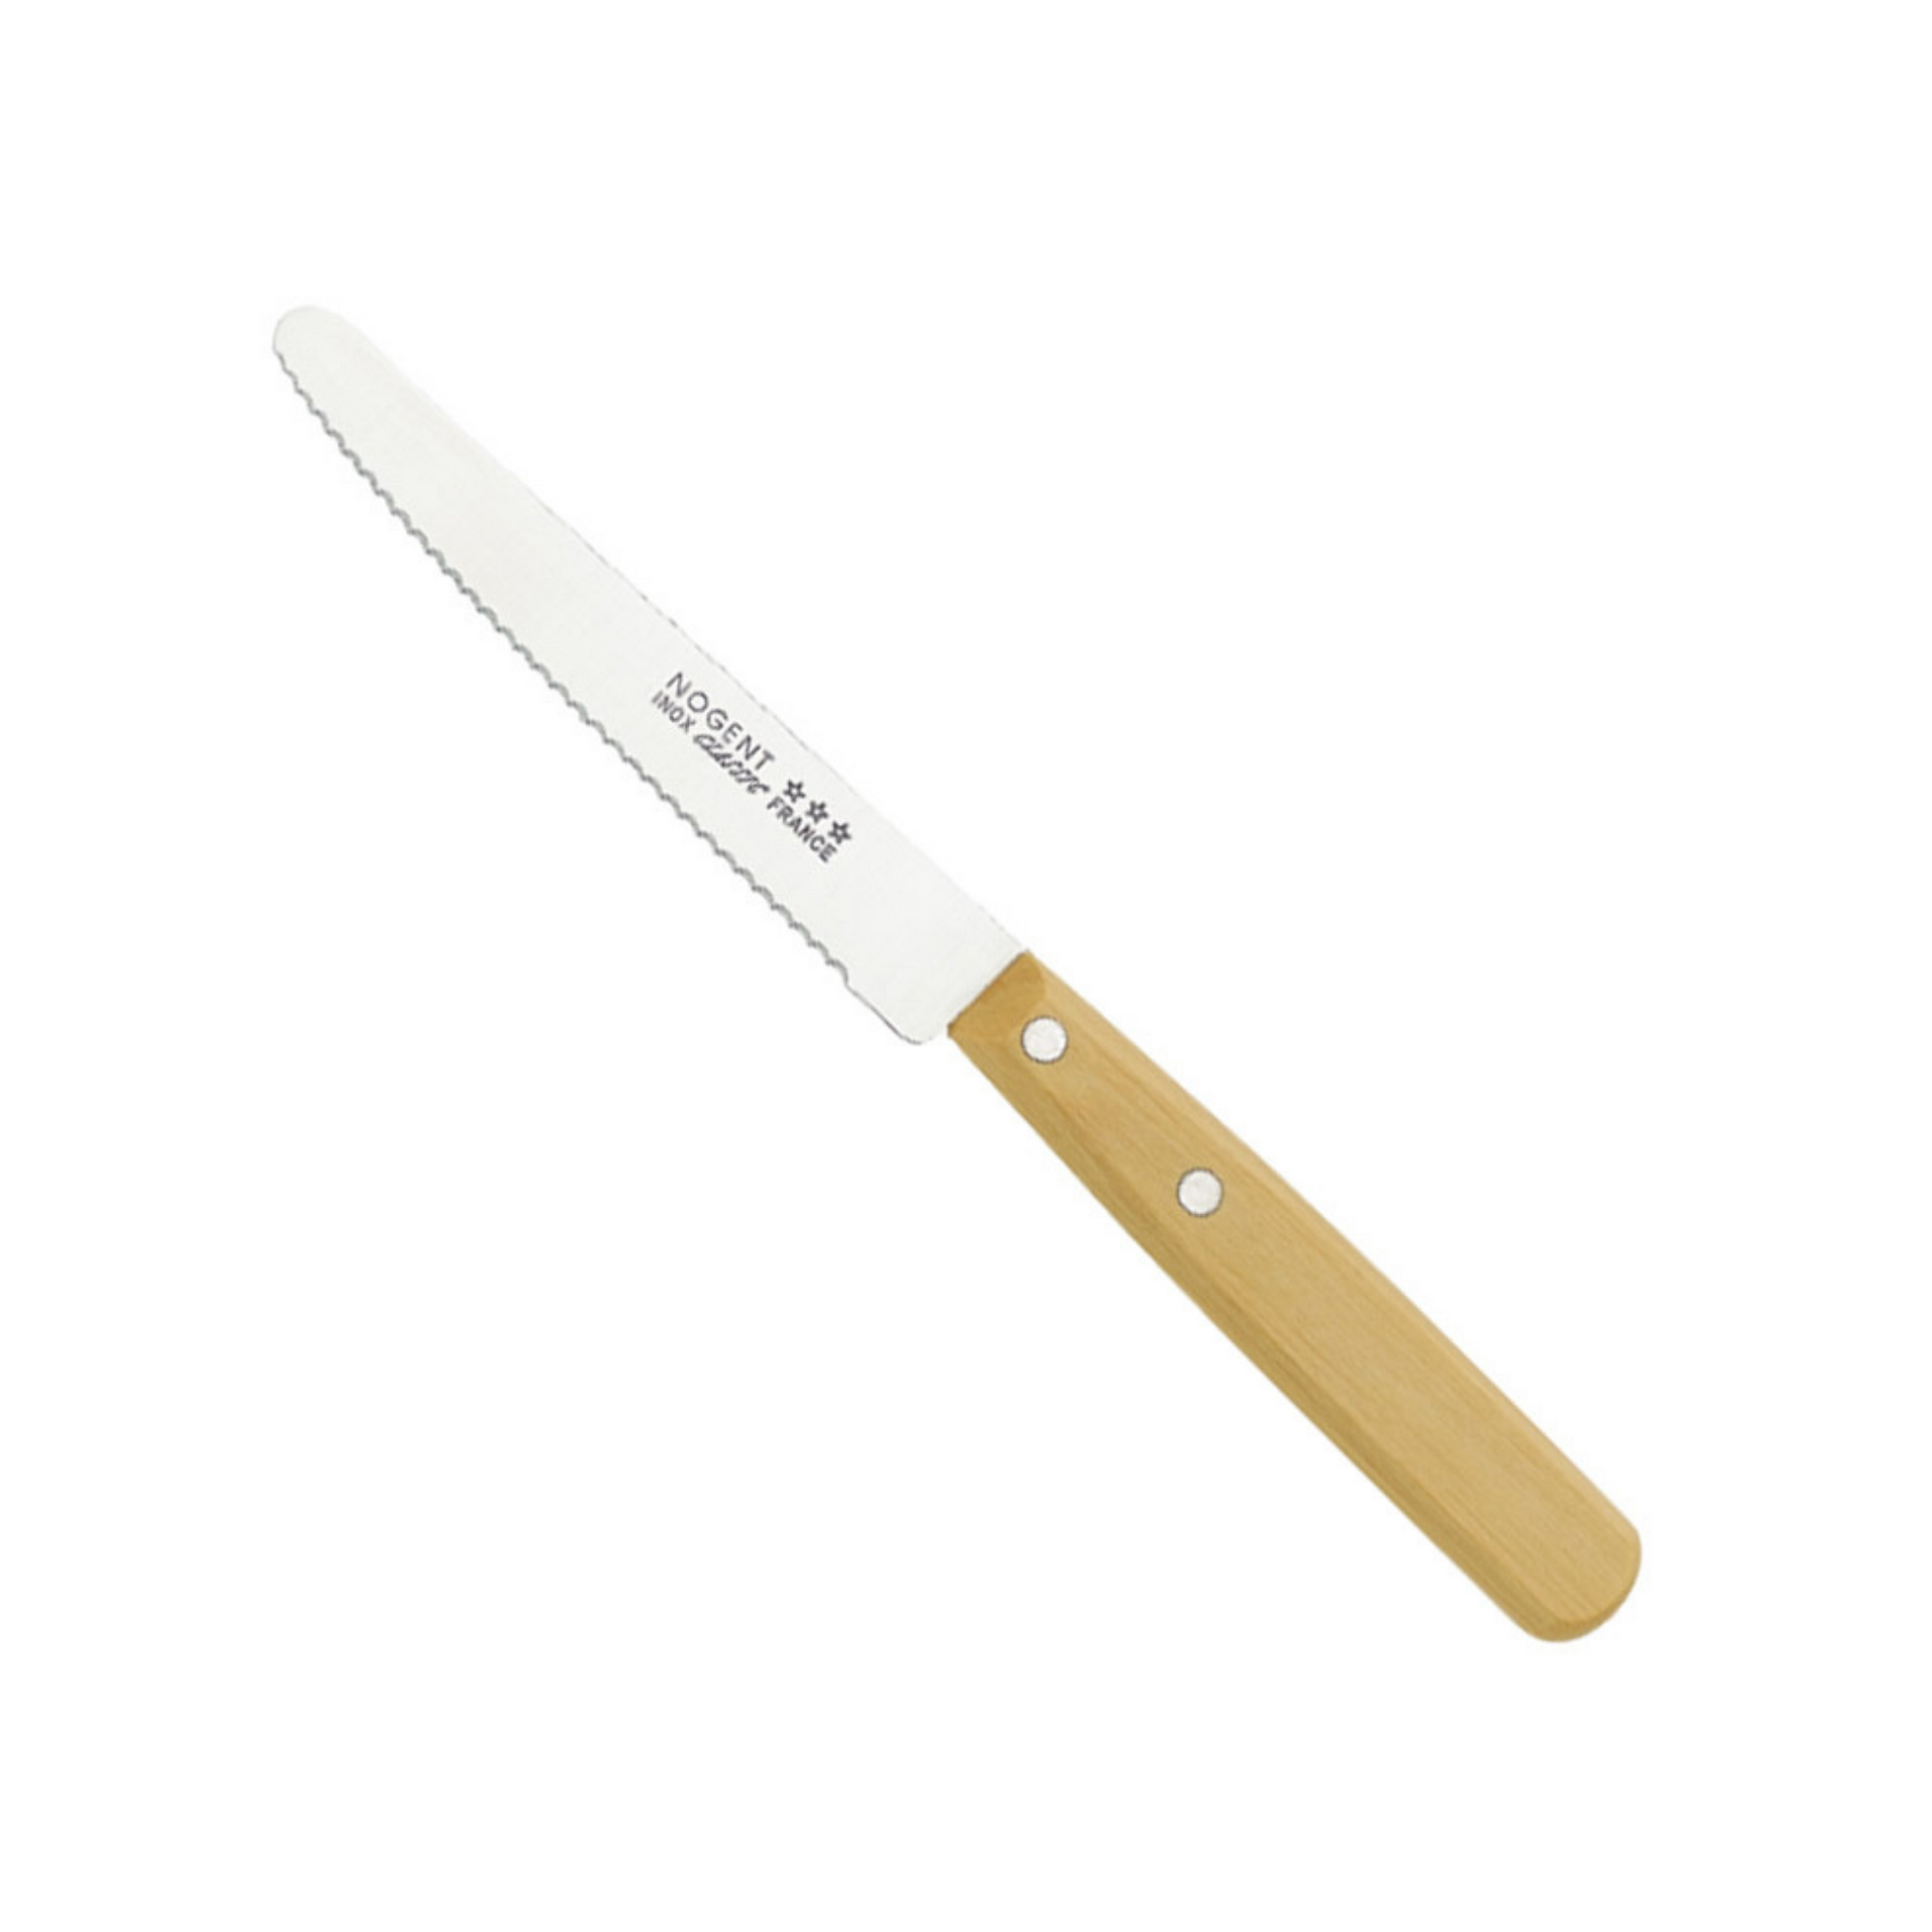 Nogent Canada Table Brunch knife made in France Clementine Boutique